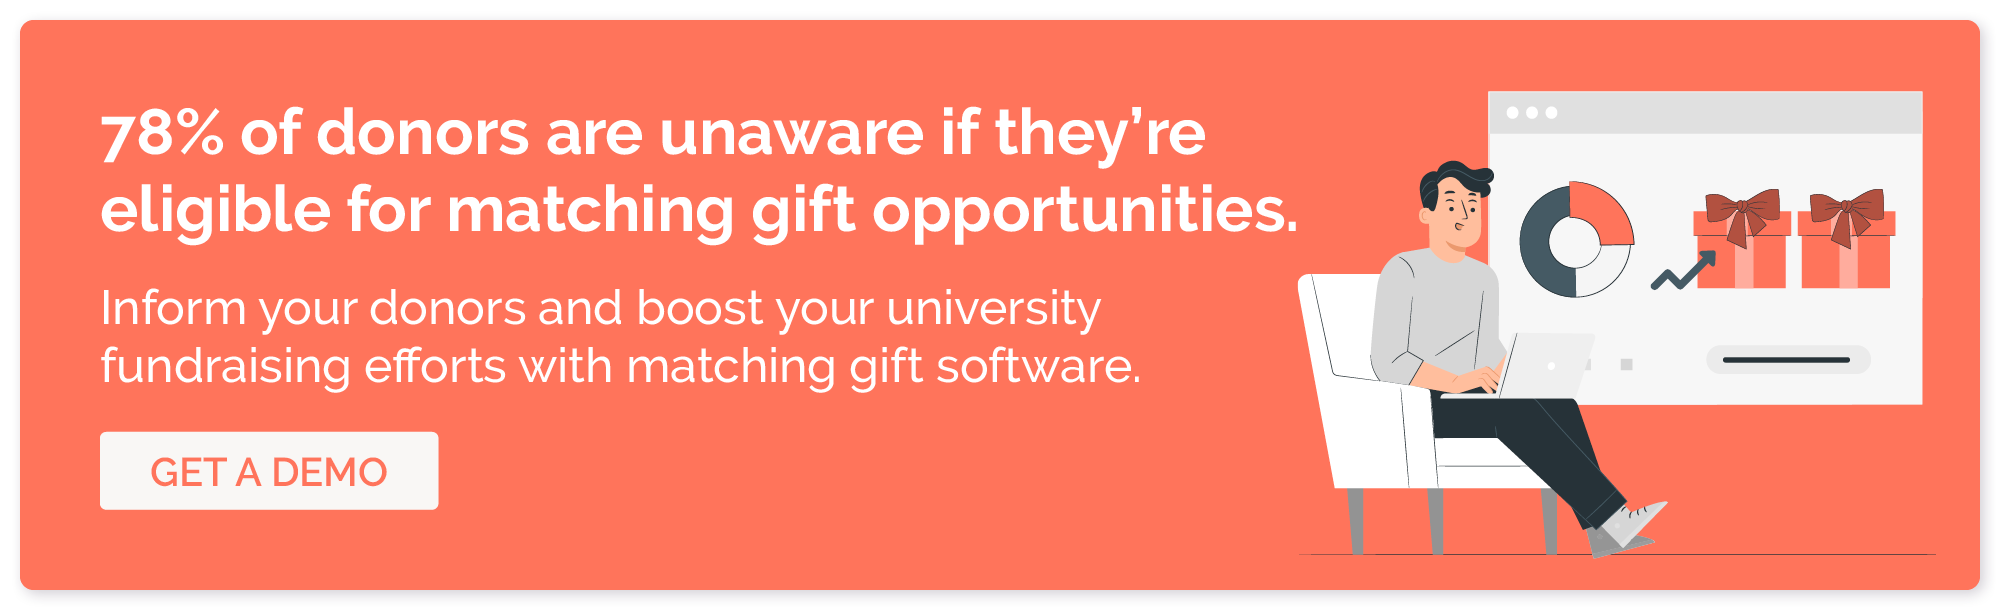 Click through to get a demo of our matching gift software and boost your university fundraising efforts.